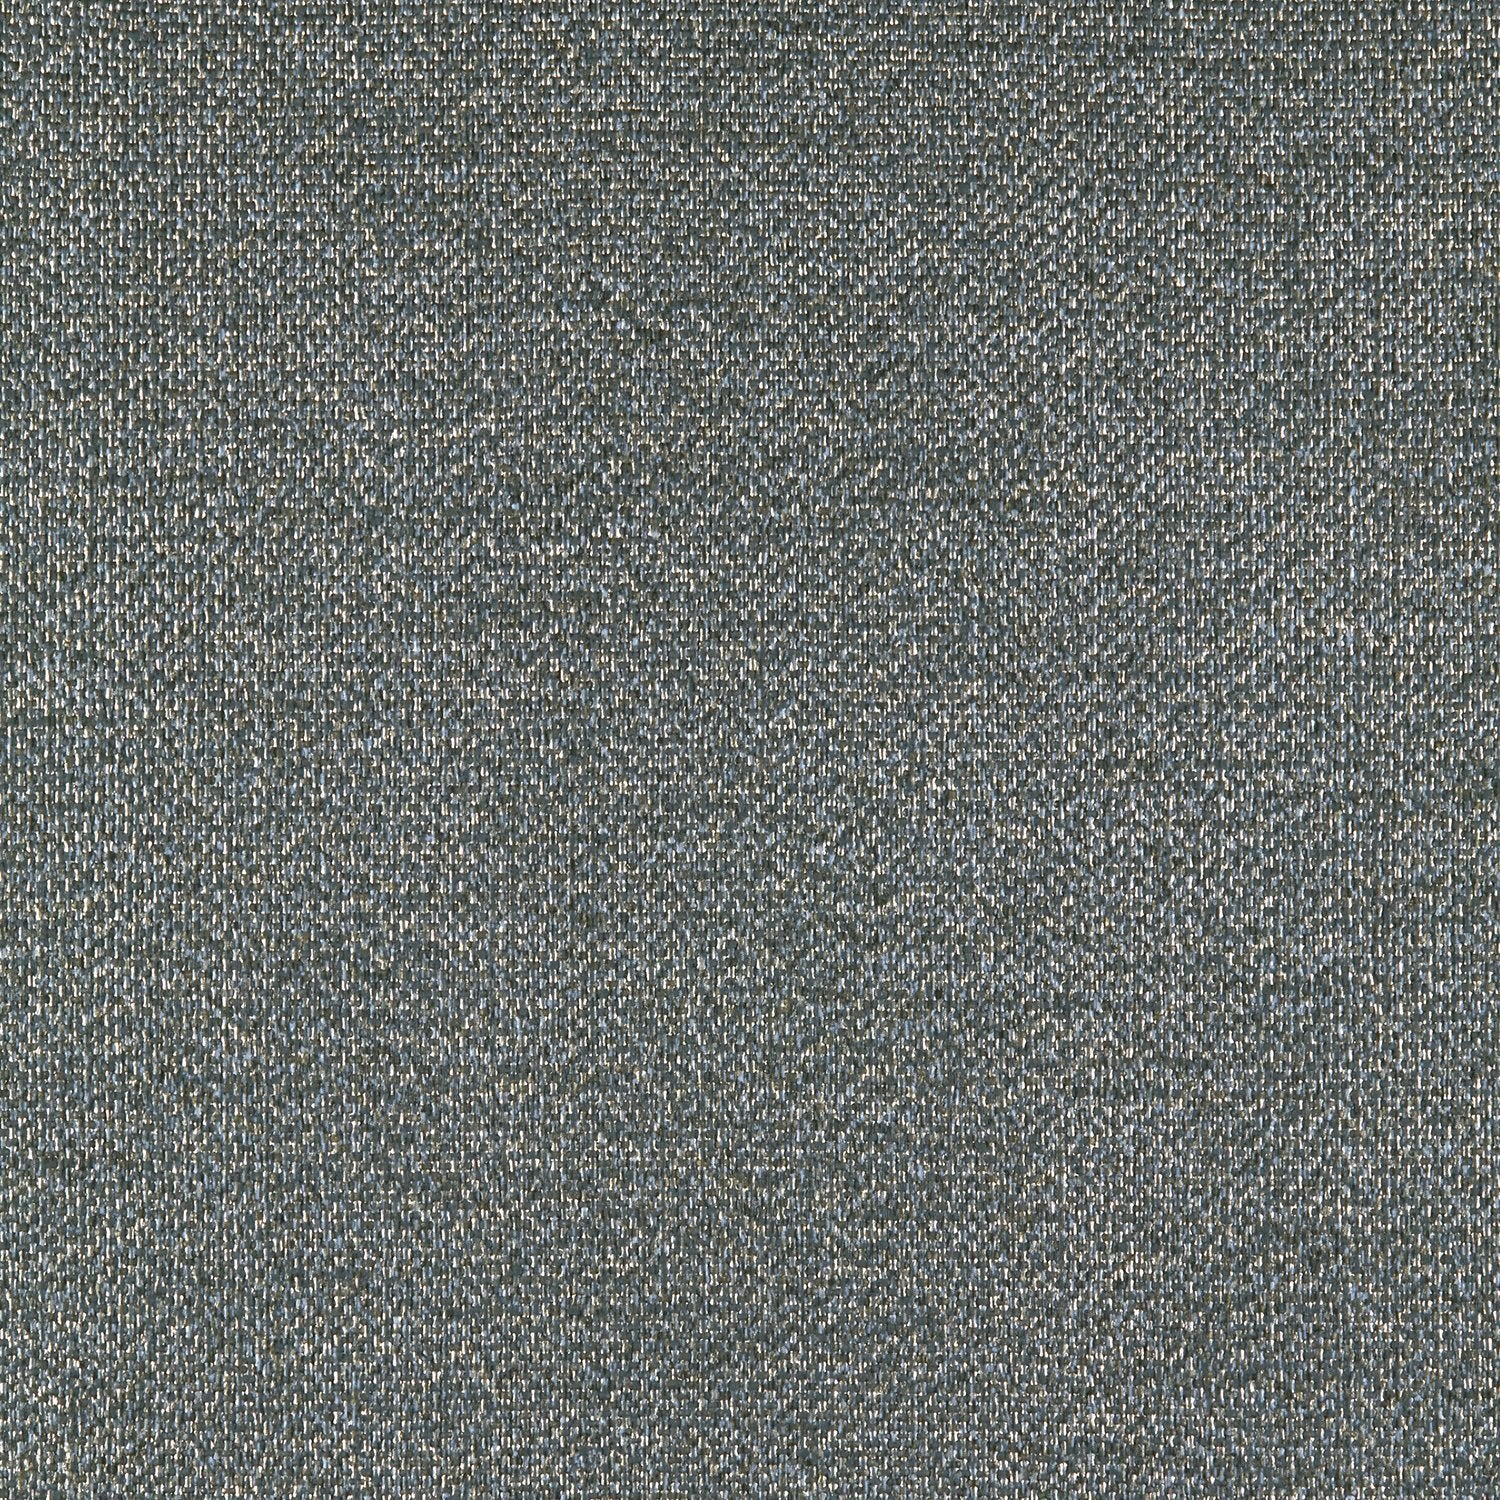 Tweed - Y46941 - Wallcovering - Vycon - Kube Contract